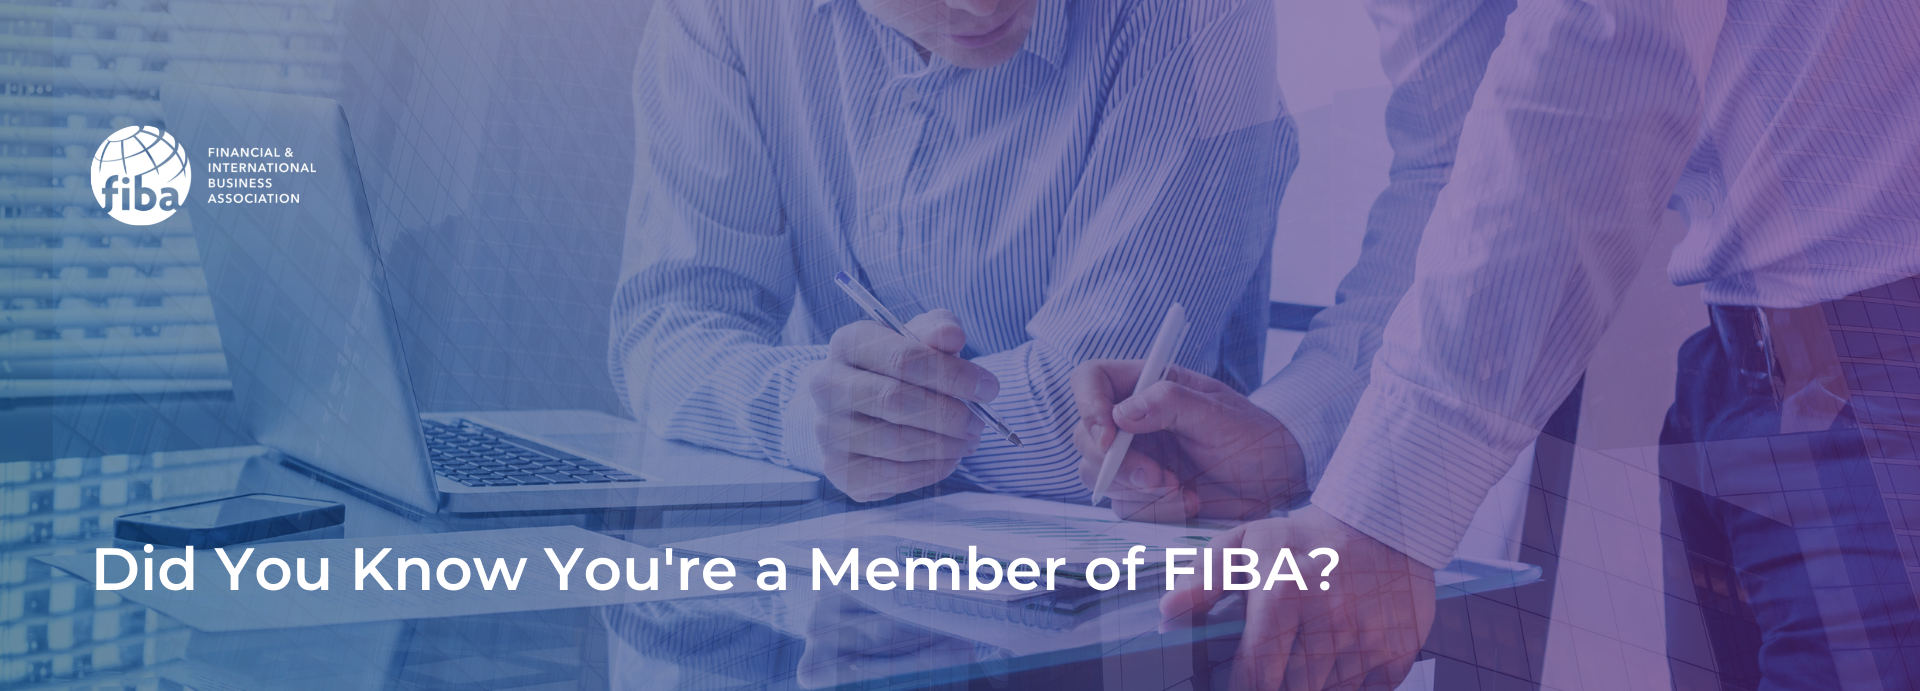 Did You Know You’re a Member of FIBA?